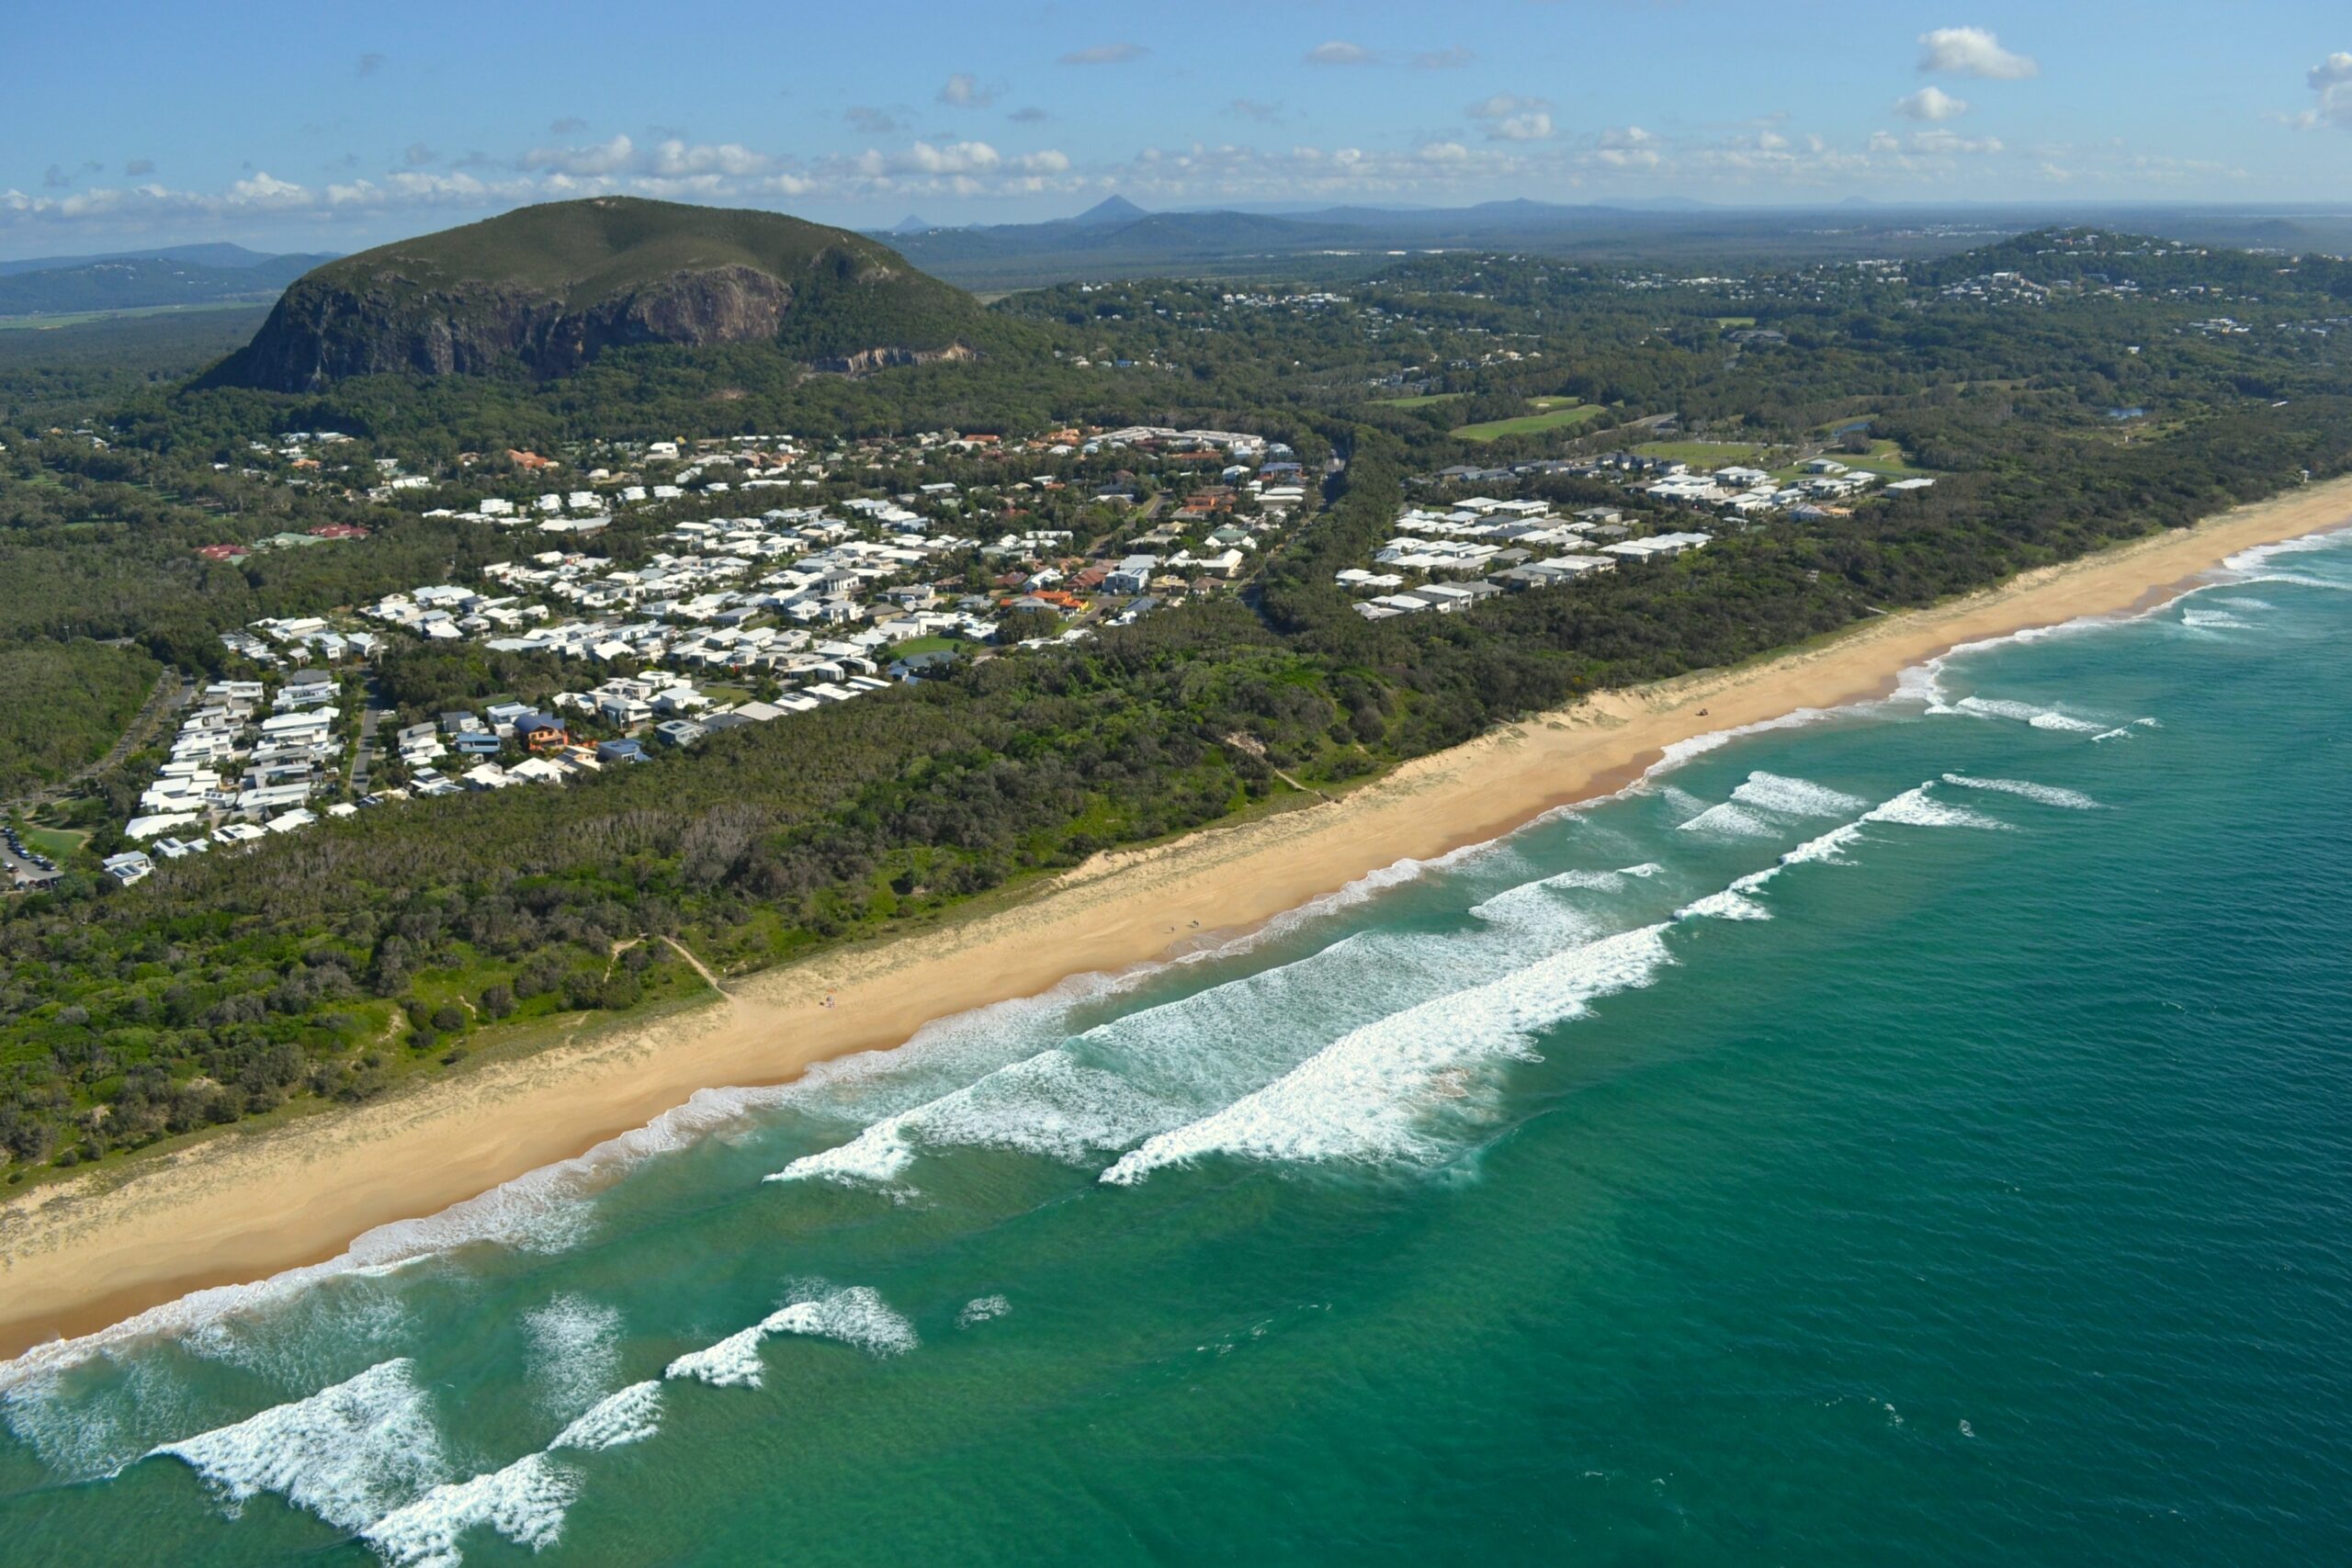 Aerial view over Mount Coolum